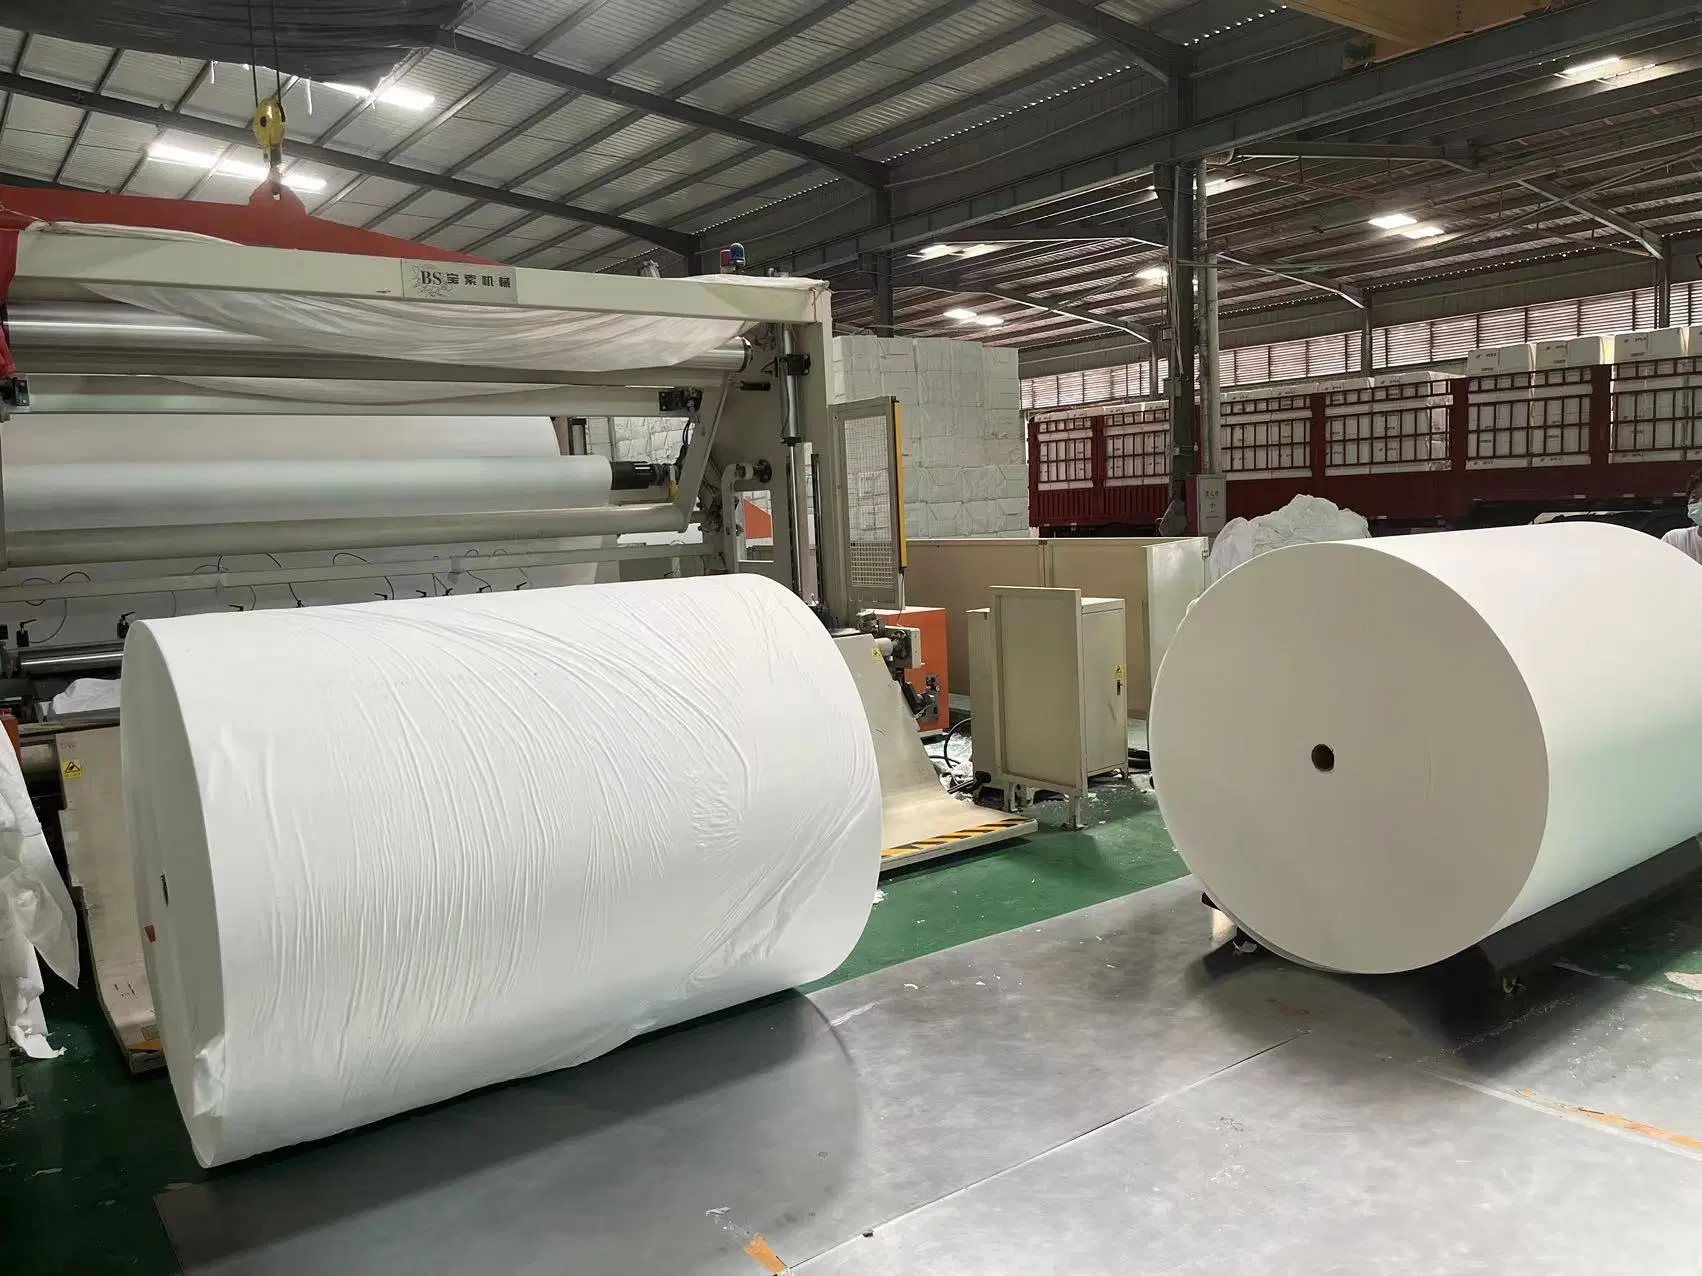 Grade a Wood Pulp Jumbo Roll Tissue for Toilet Paper, Facial Tissue